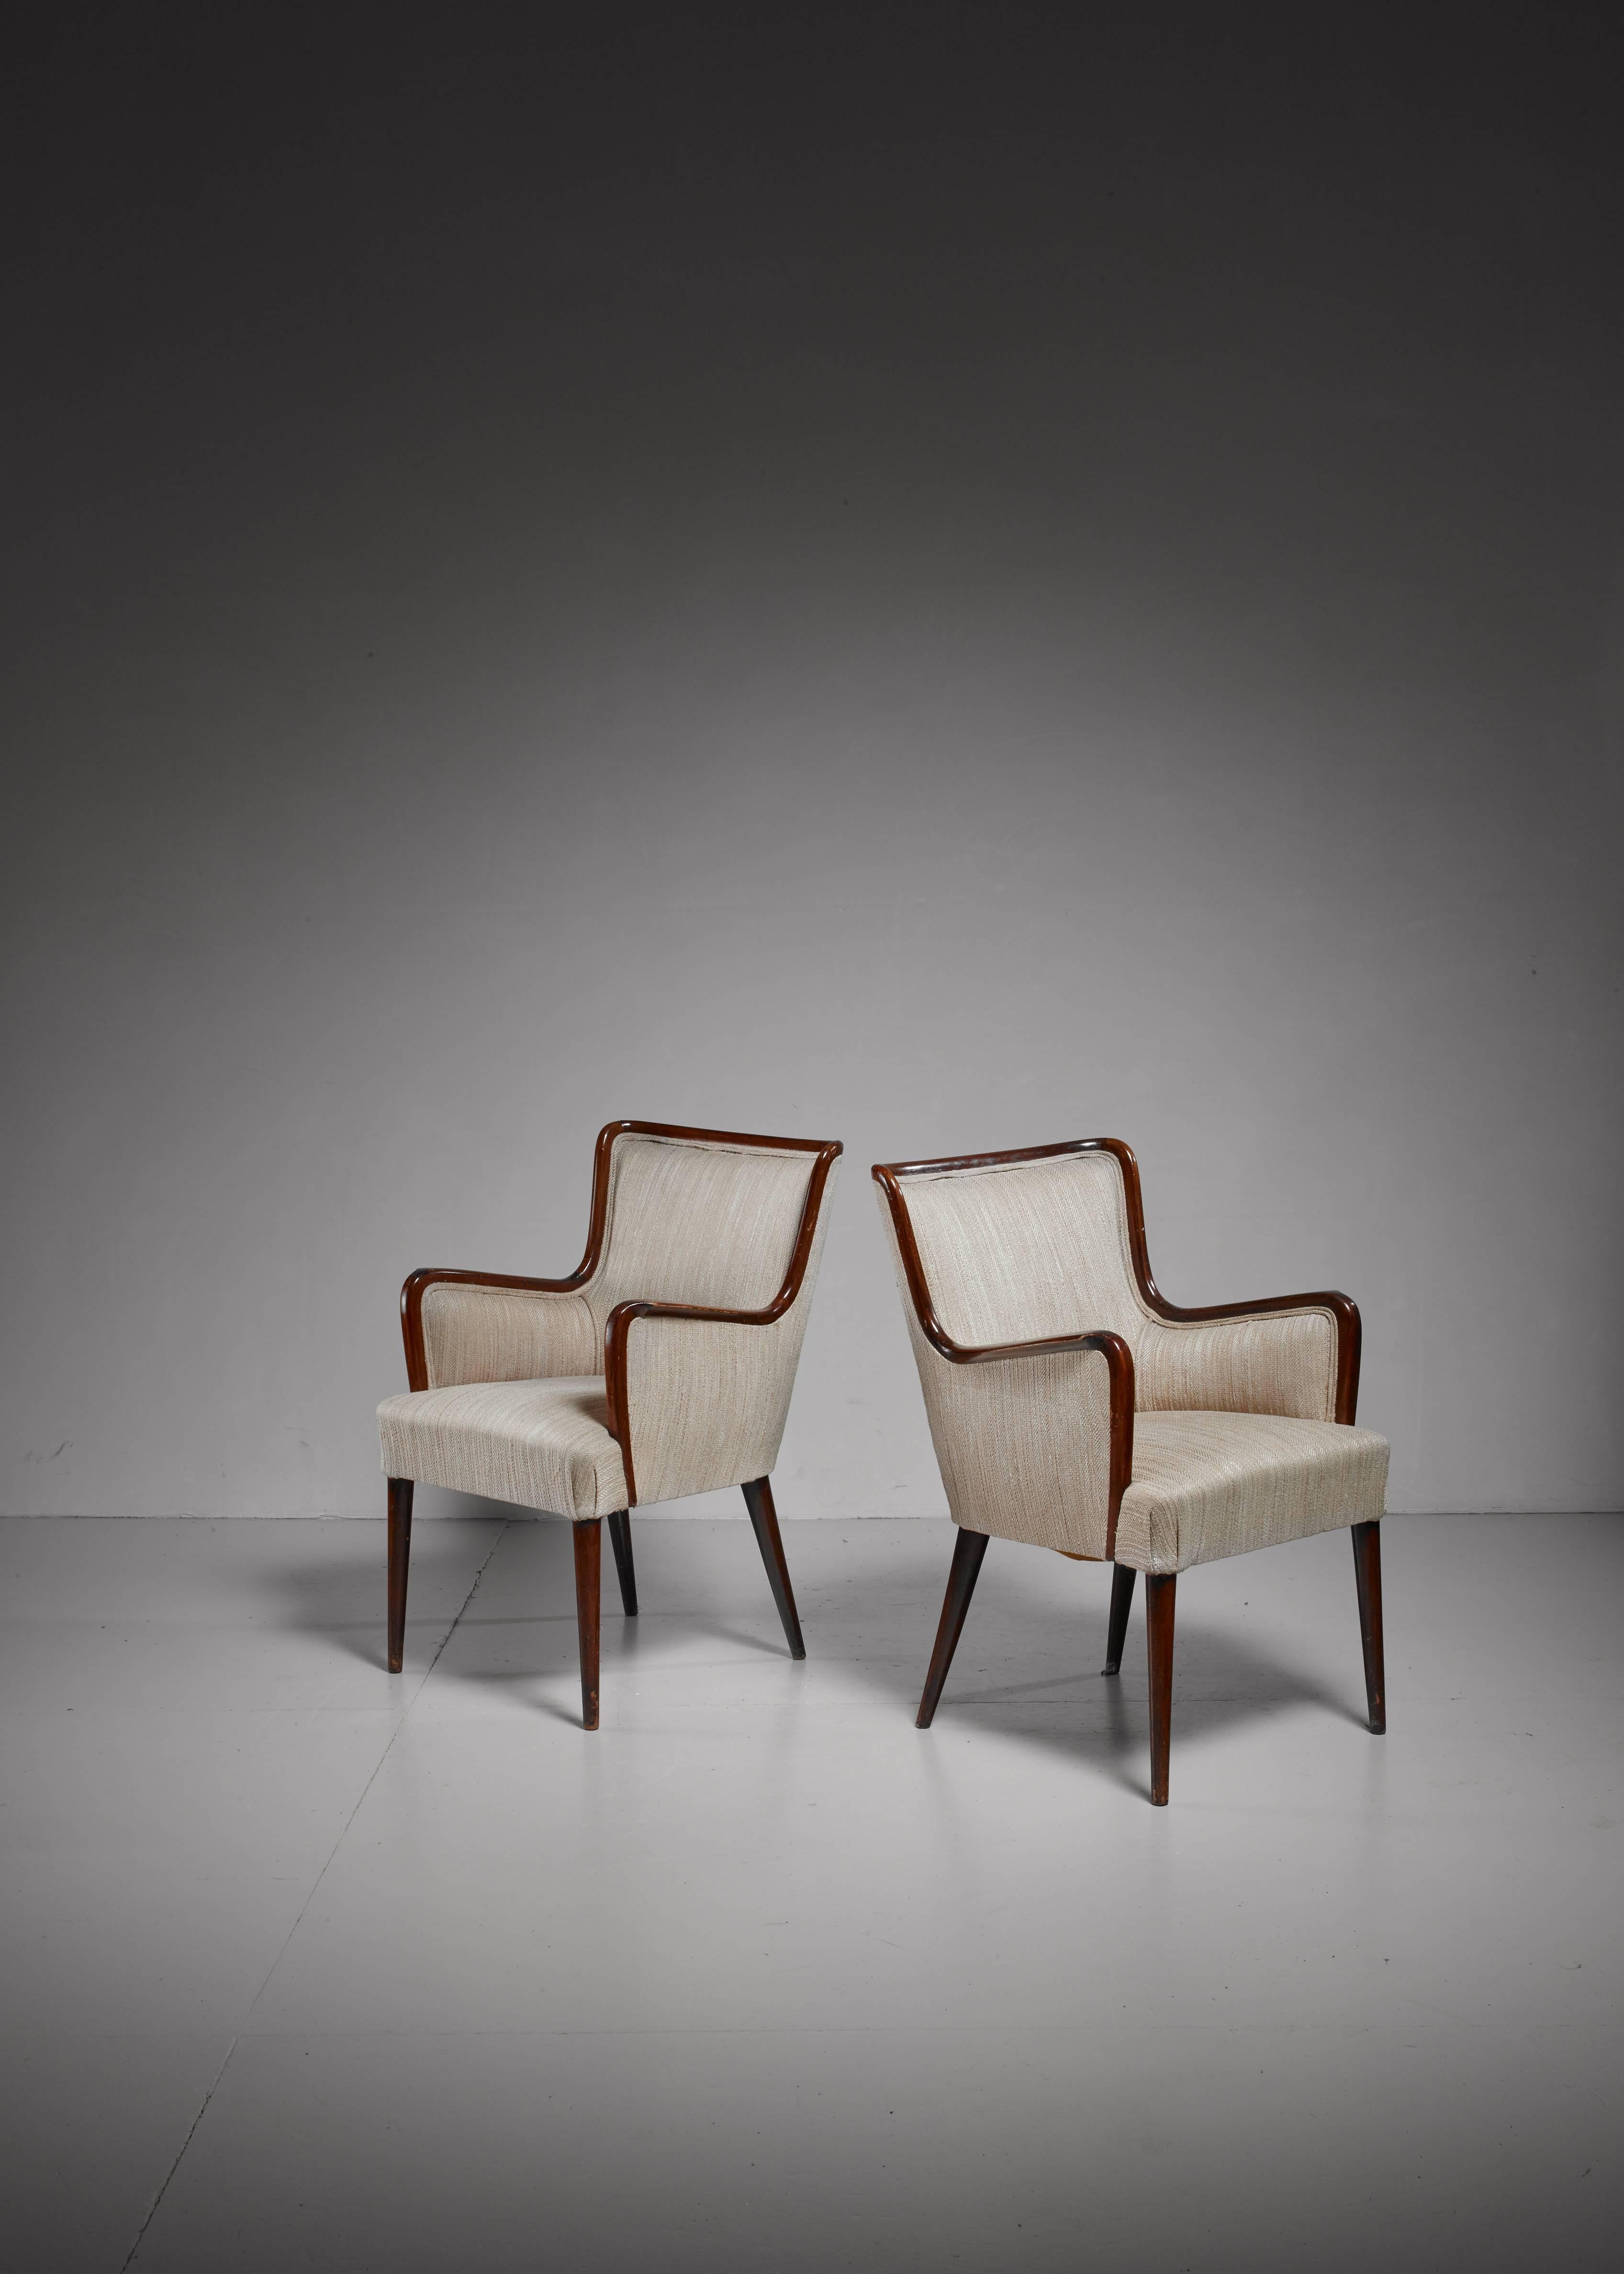 A pair of rare and original Osvaldo Borsani armchairs from the 1940s. The chairs are made of a rich and warm mahogany and a beige woven fabric upholstery. The subtle interplay of lines of the wooden frame and the slightly tapering feet makes these